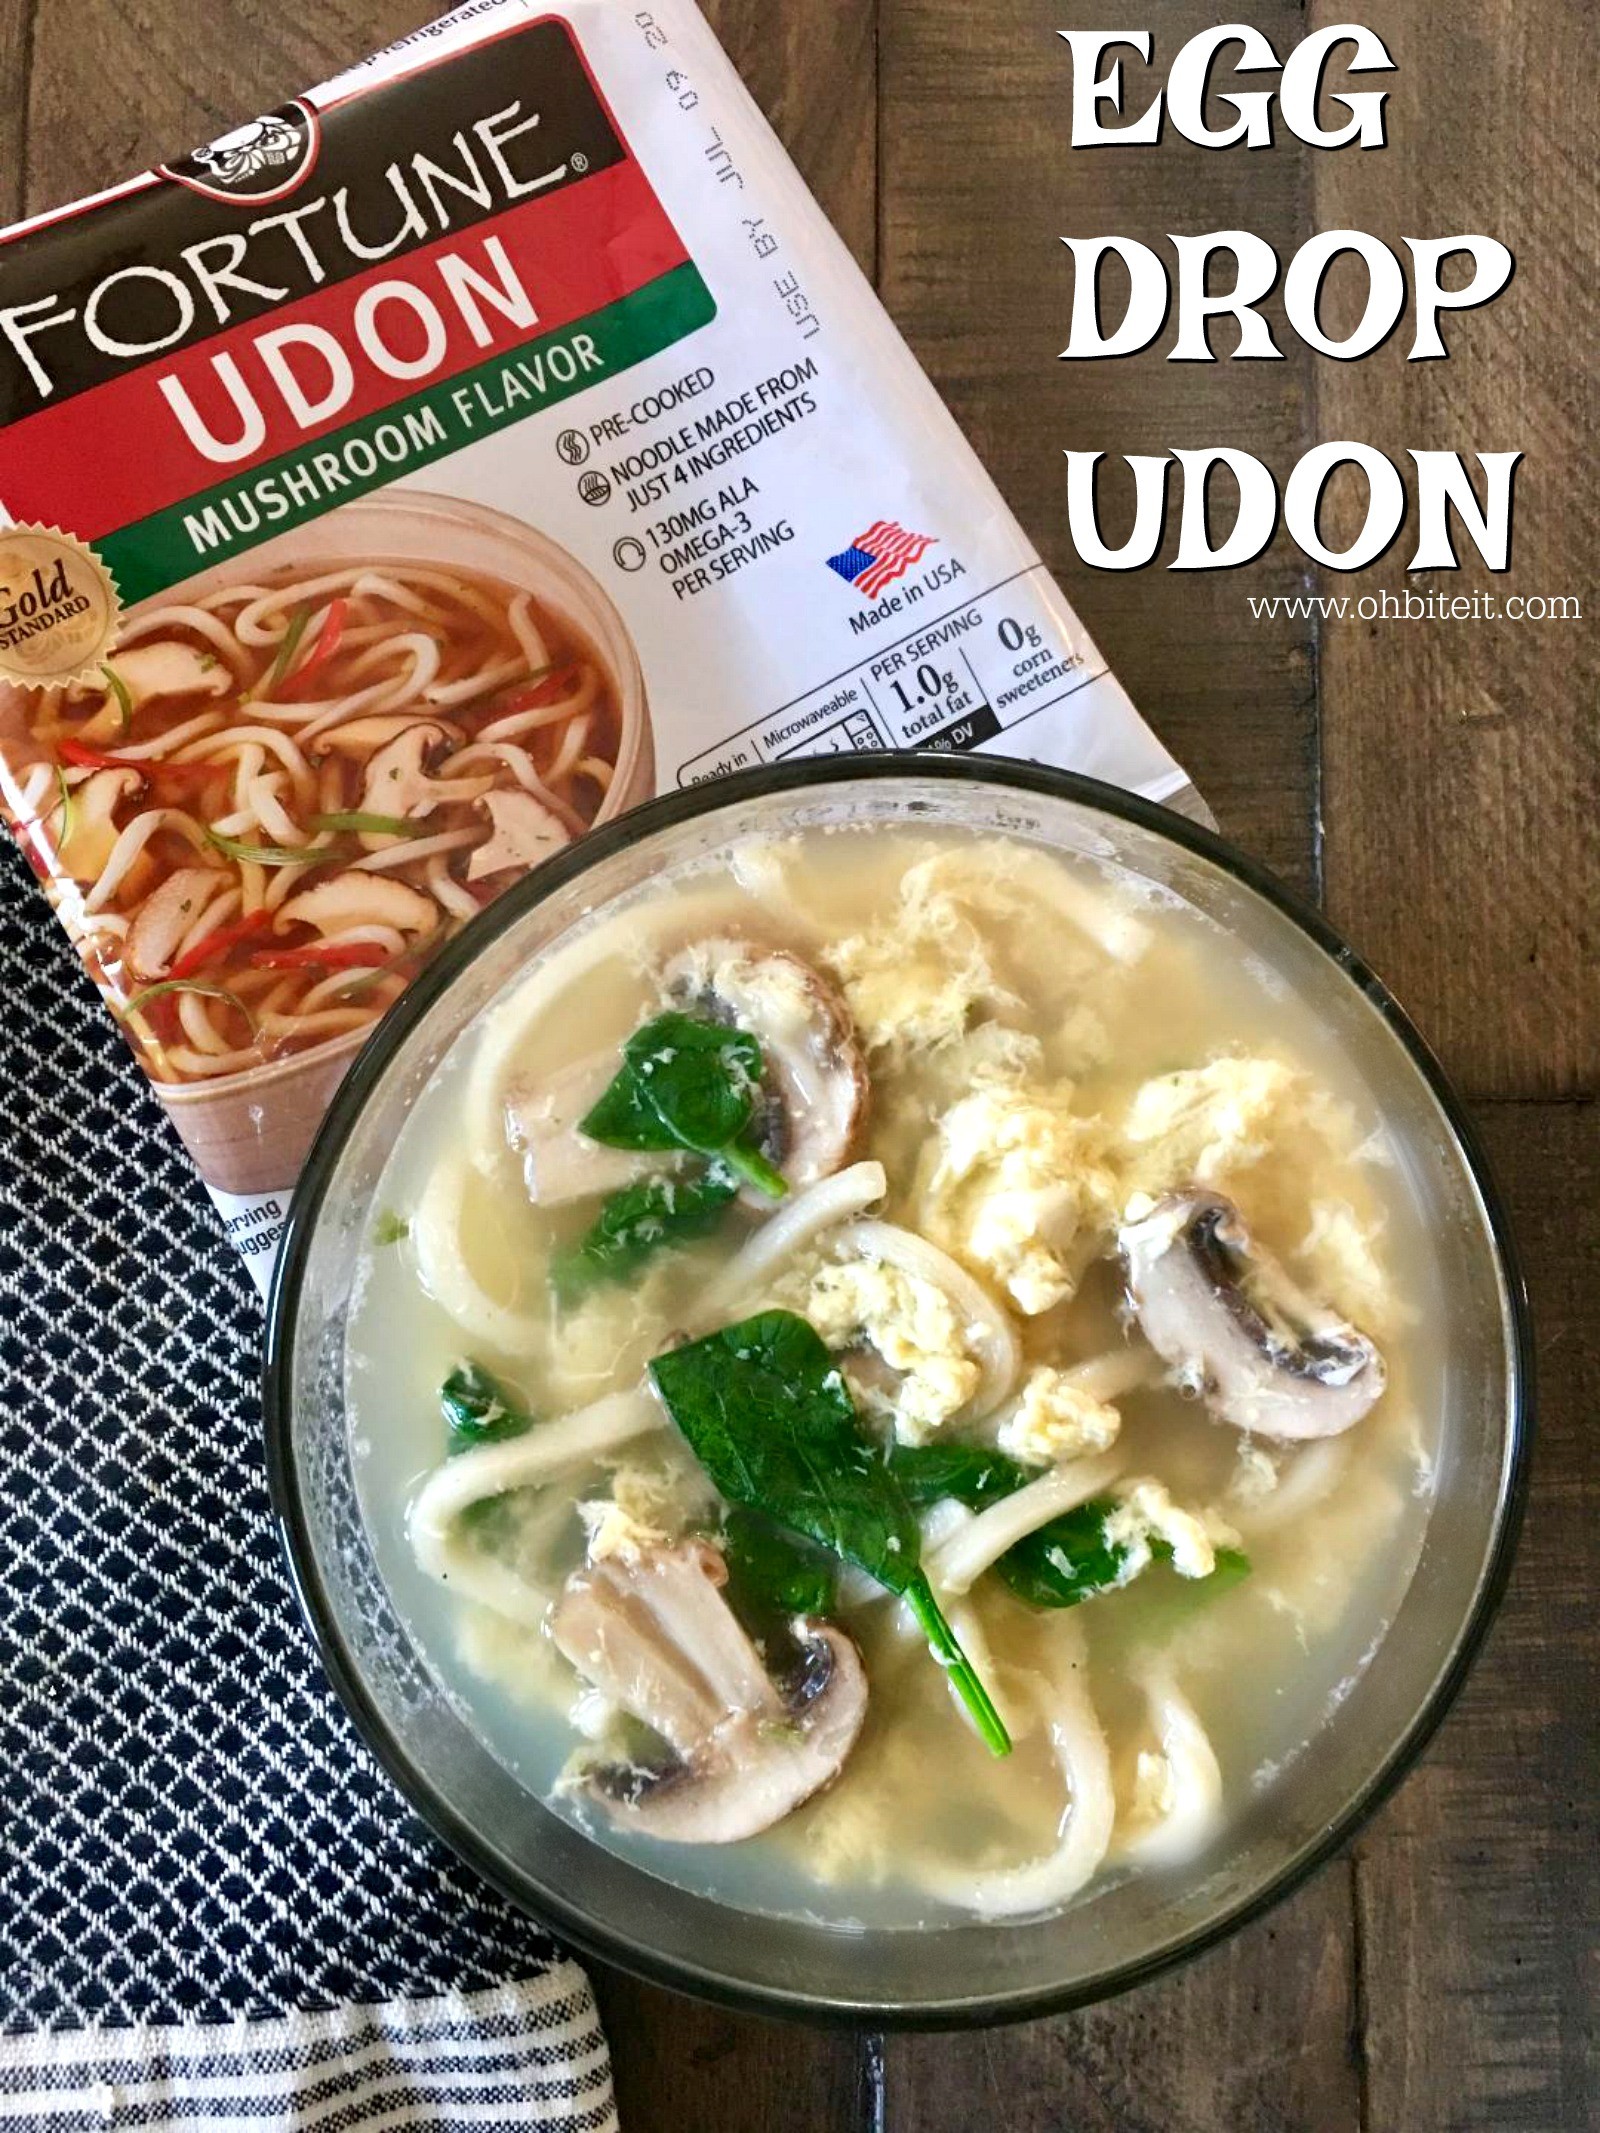 ~Egg Drop UDON – featuring FORTUNE!